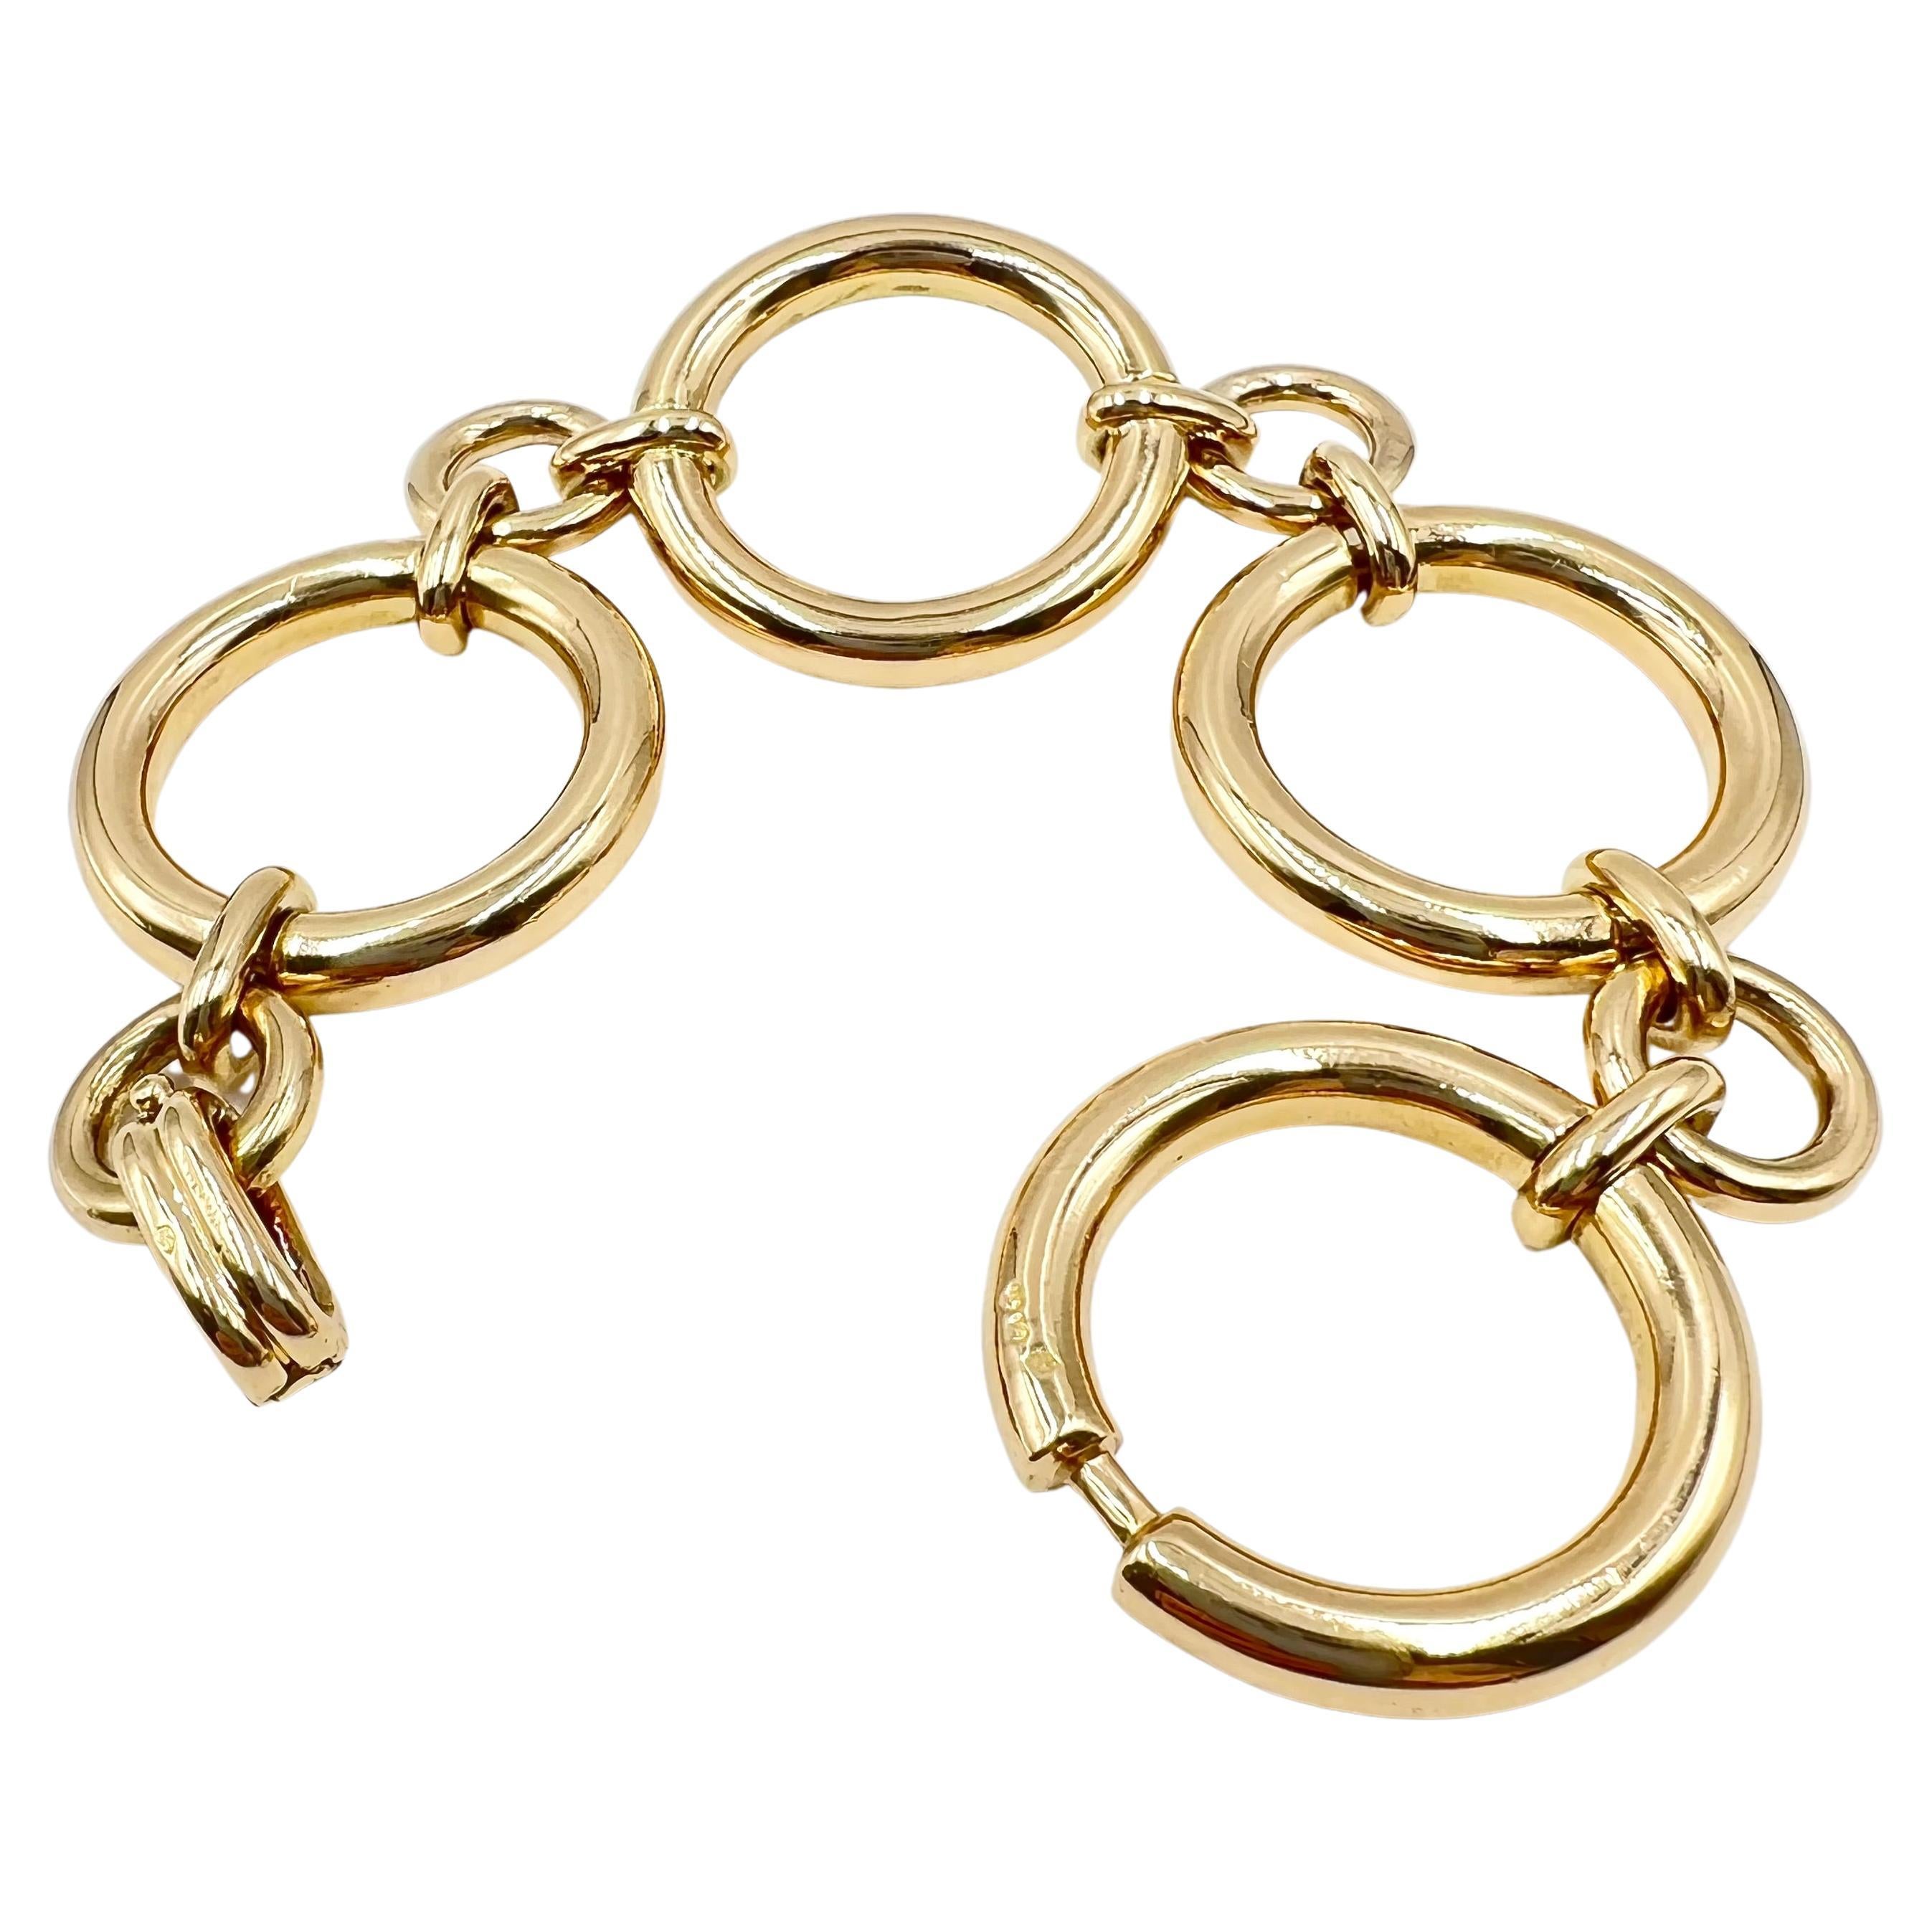 Boucheron French circular link bracelet in 18kt yellow gold.  Classic 1960's design comprised of four larger circular links joined by four smaller, tubular links. Signed 